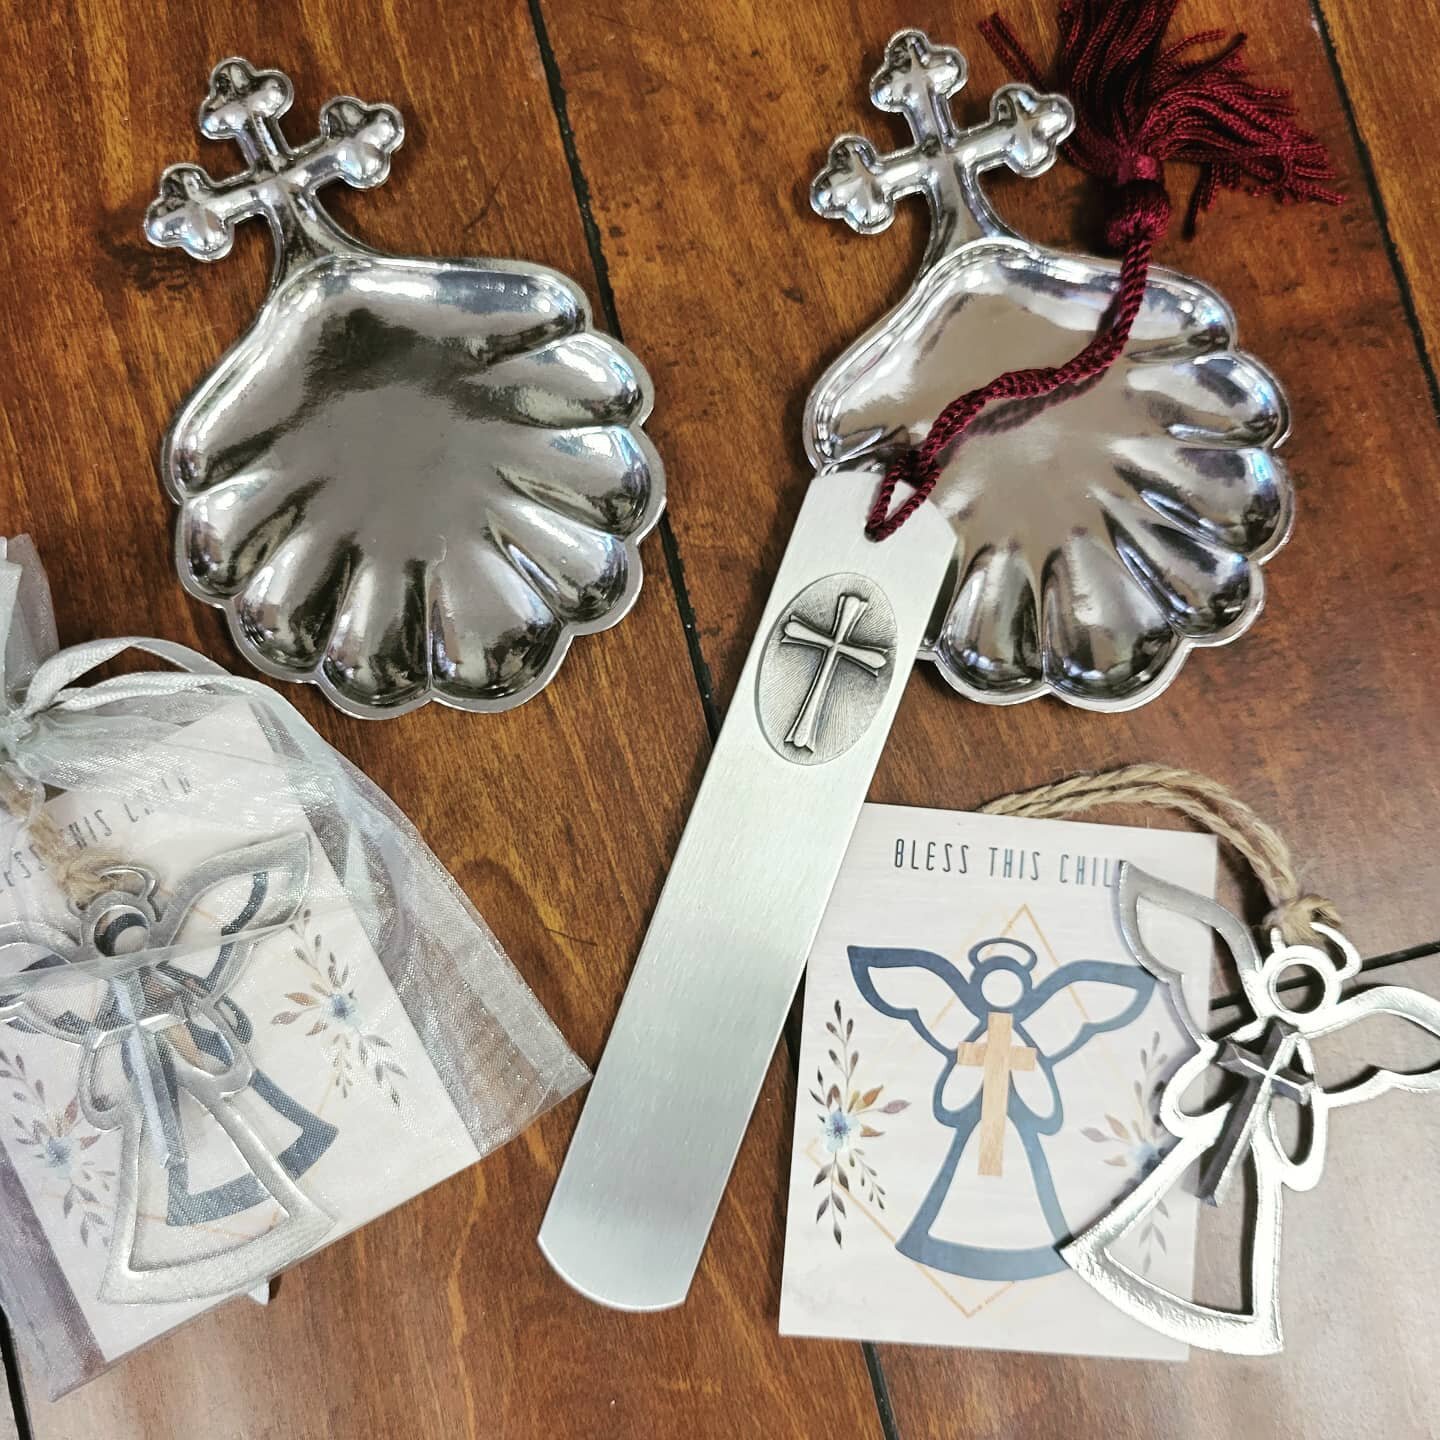 We are so excited about the new items we found at market last week!  Lots of new goodies already beginning to arrive!
.
.
.
.
#allsaintschurchwinterpark #christiangiftshop #baptismgifts #shopparkavewp #shoplocal